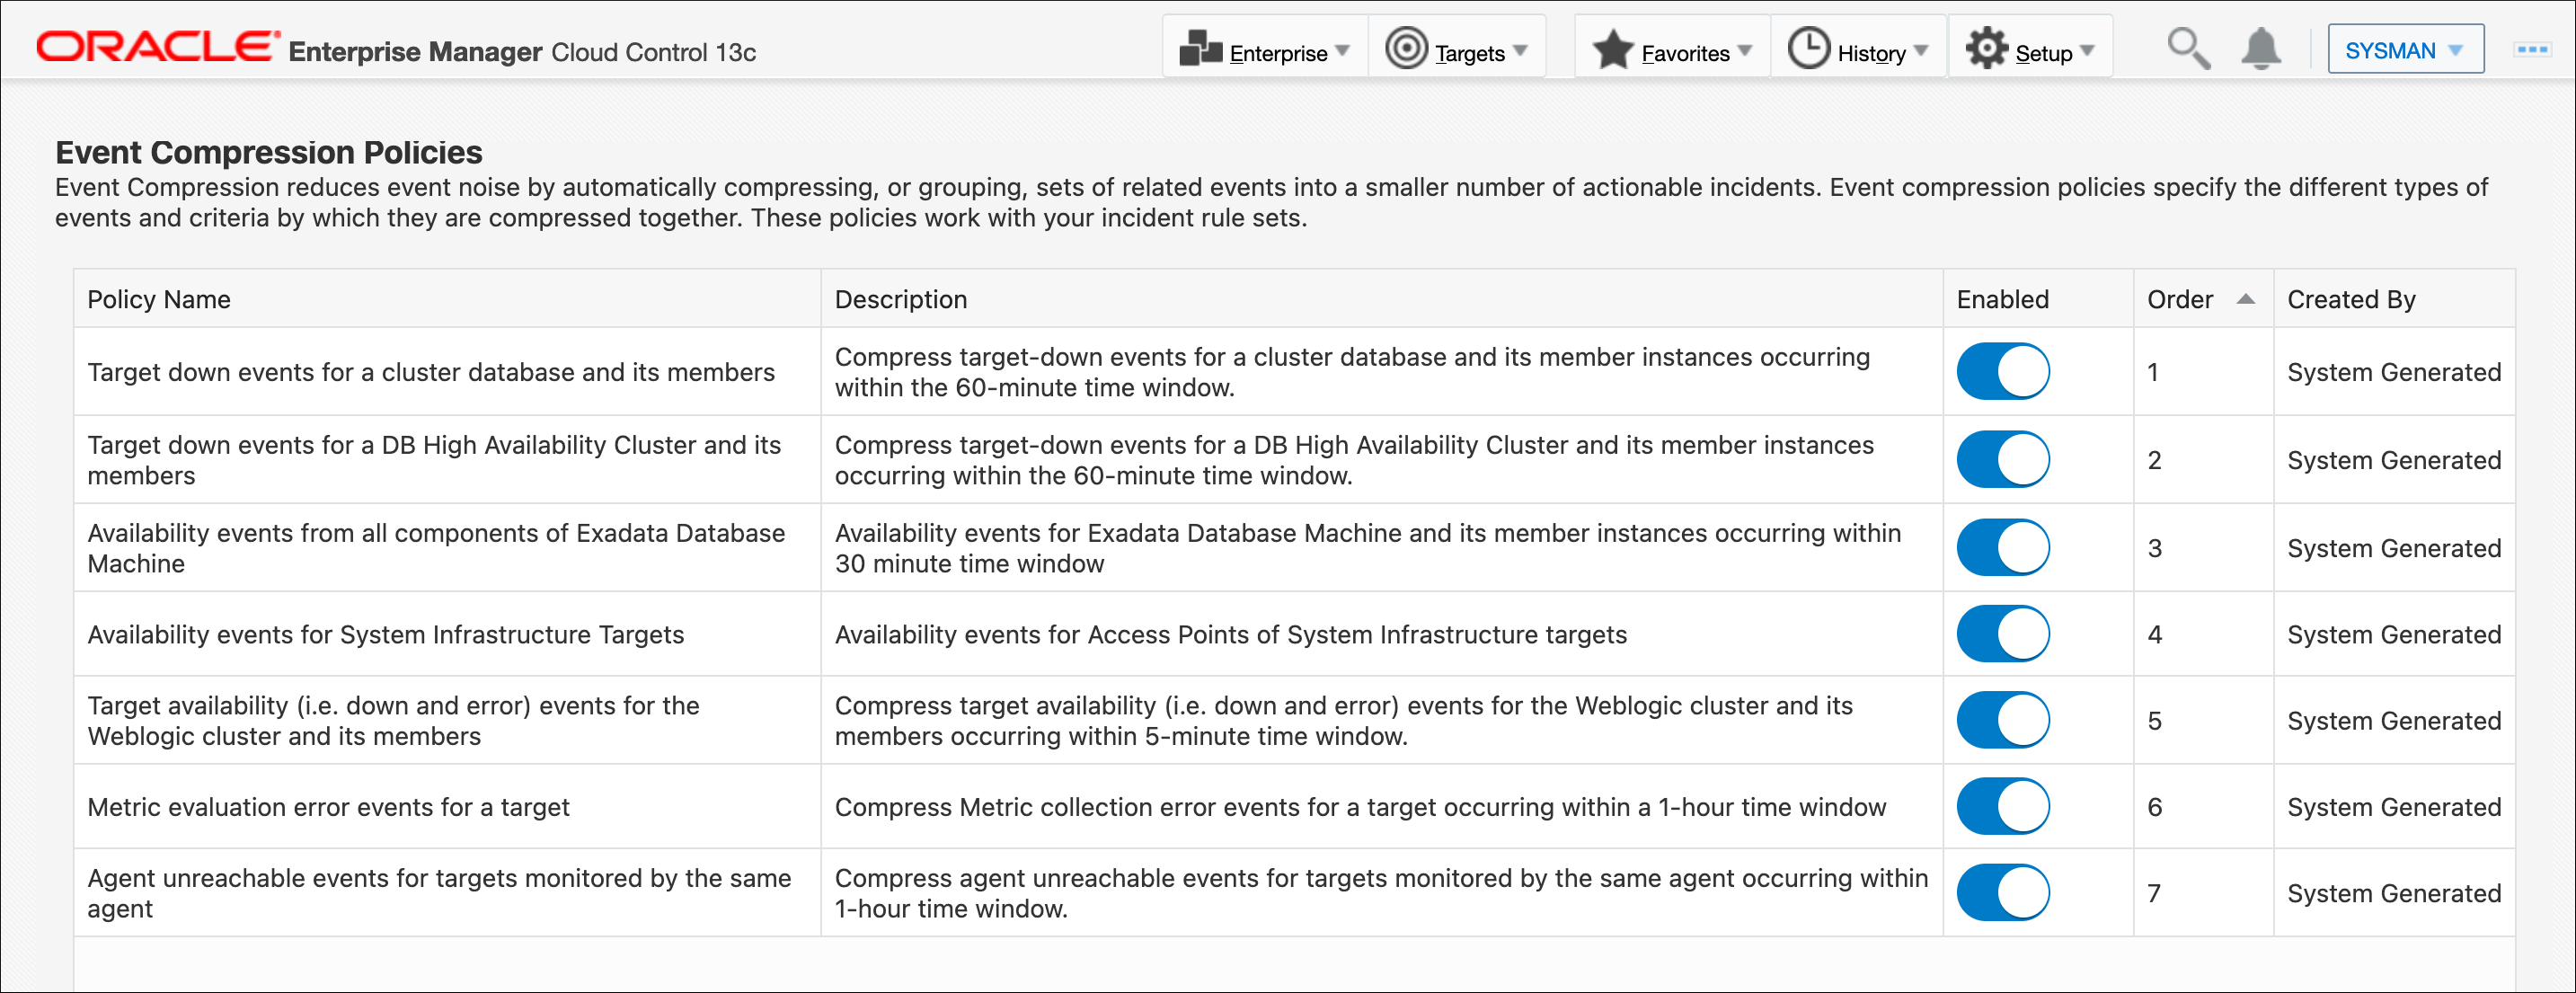 Image shows the Event Compression Policies page.